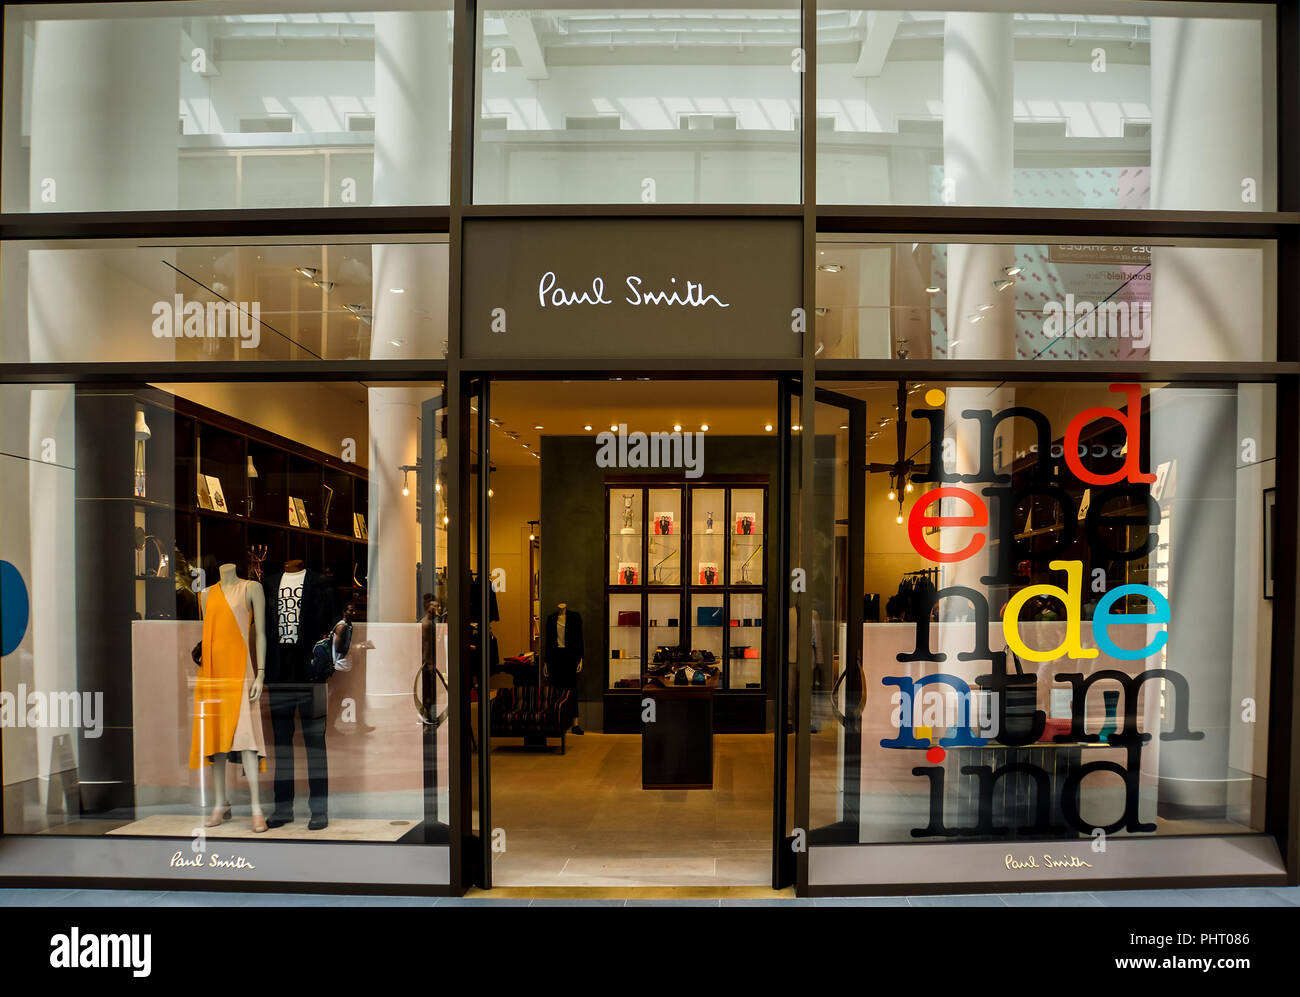 NEW YORK, USA - MAY 2, 2013: Detail of Paul Smith store in New York. It ...